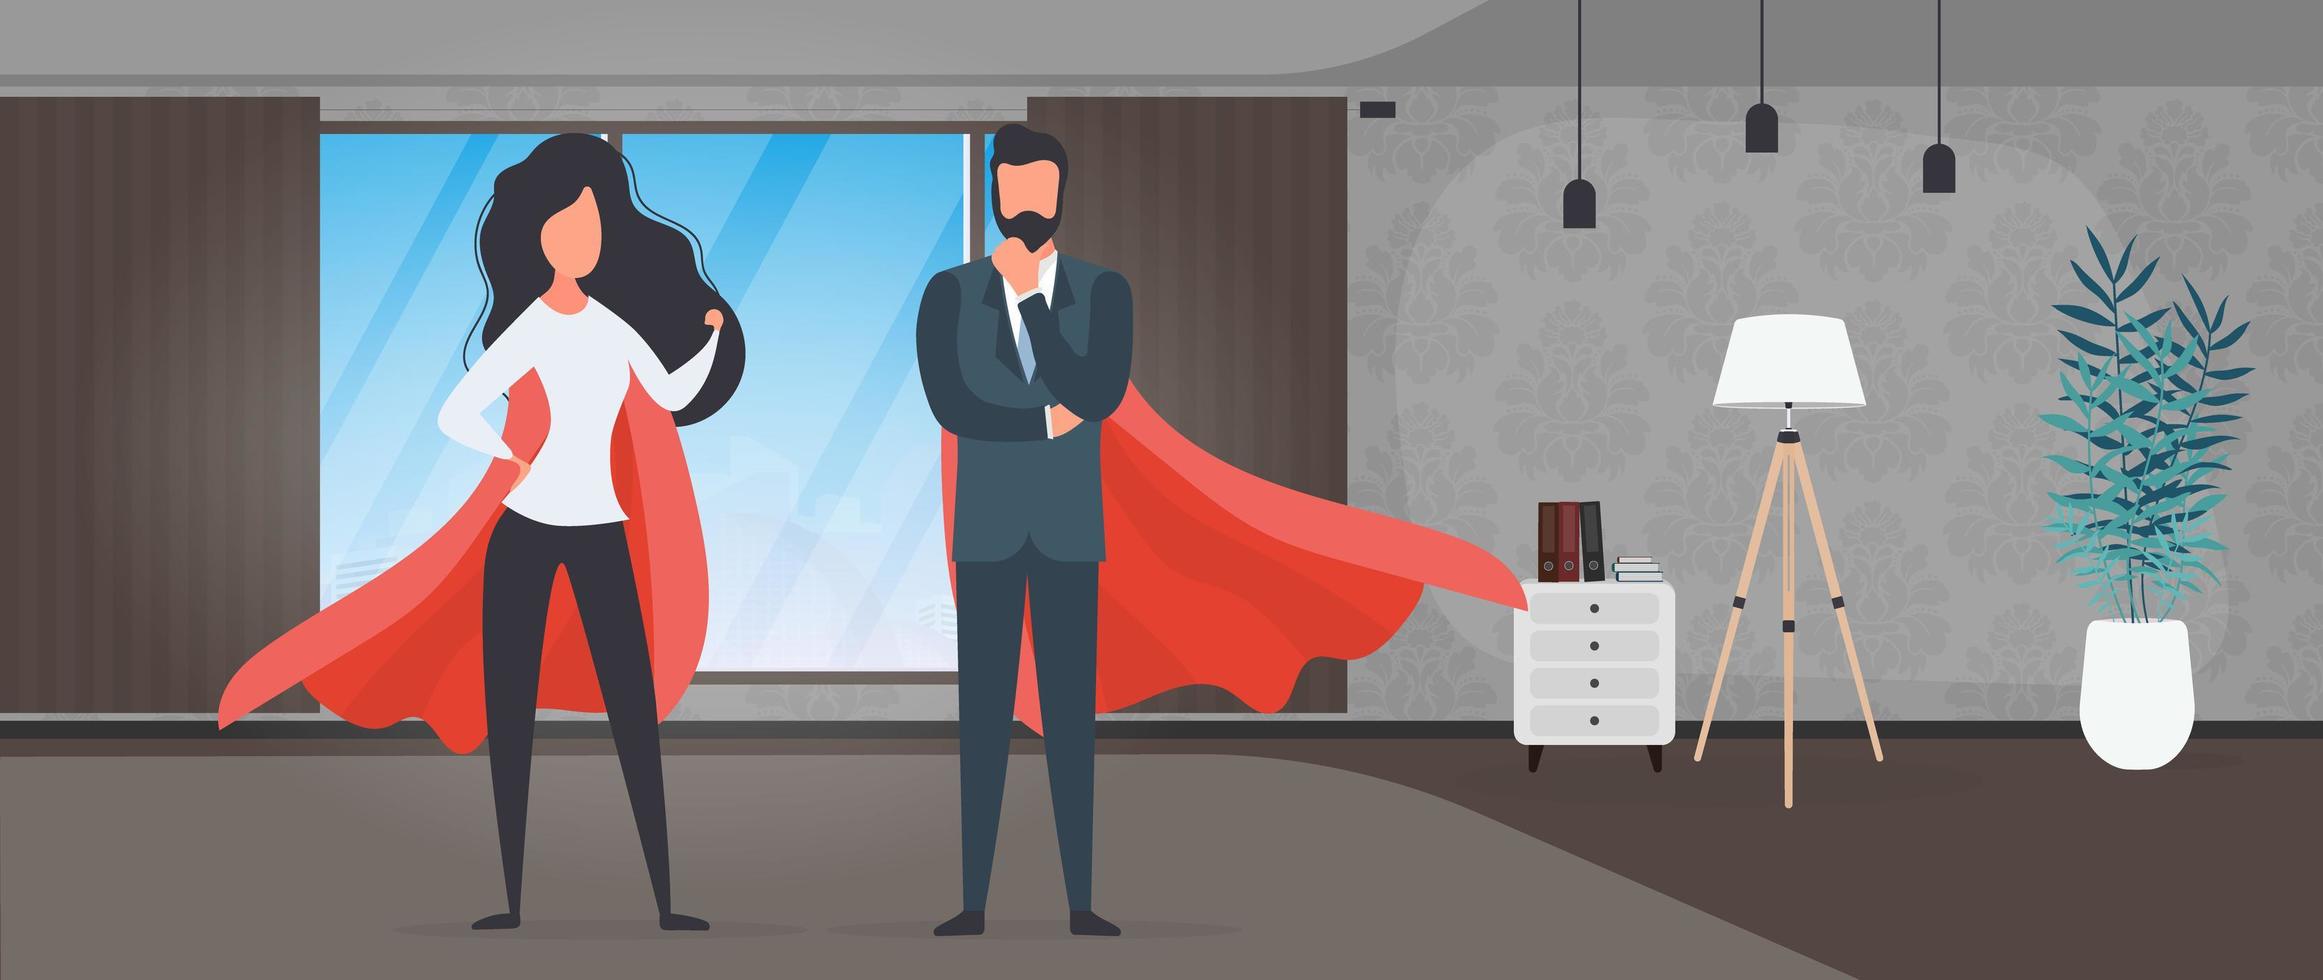 Girl and guy with a red raincoat. Woman and man superhero. The concept of a successful person, business or family. Vector. vector